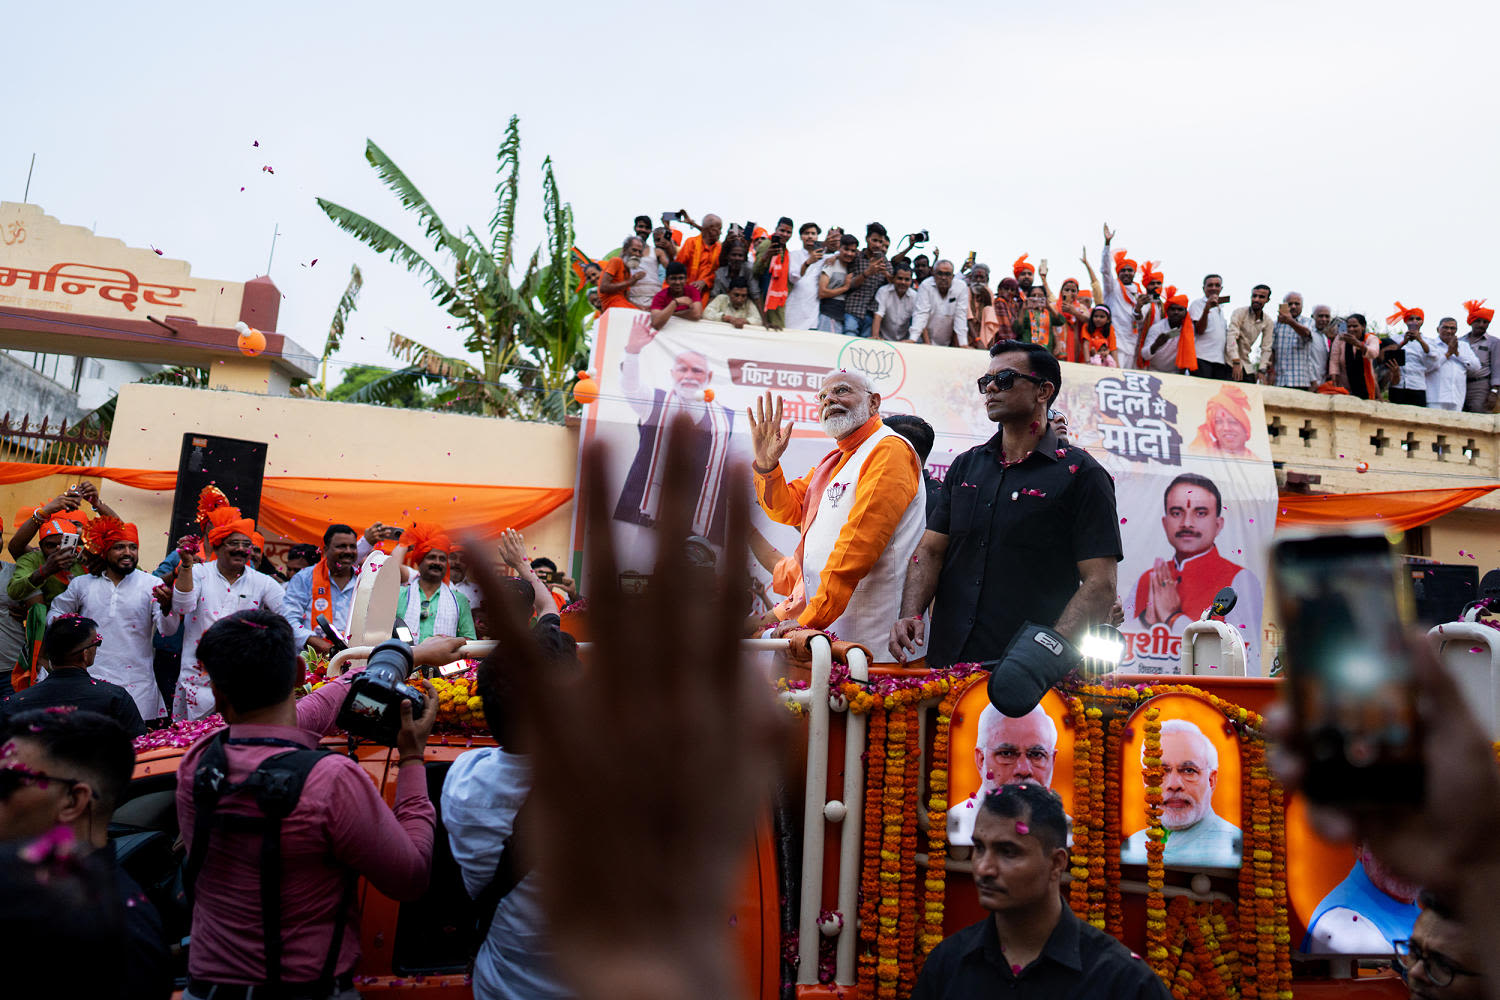 The world's biggest election looks surprisingly close as Modi's hopes for an India landslide fade